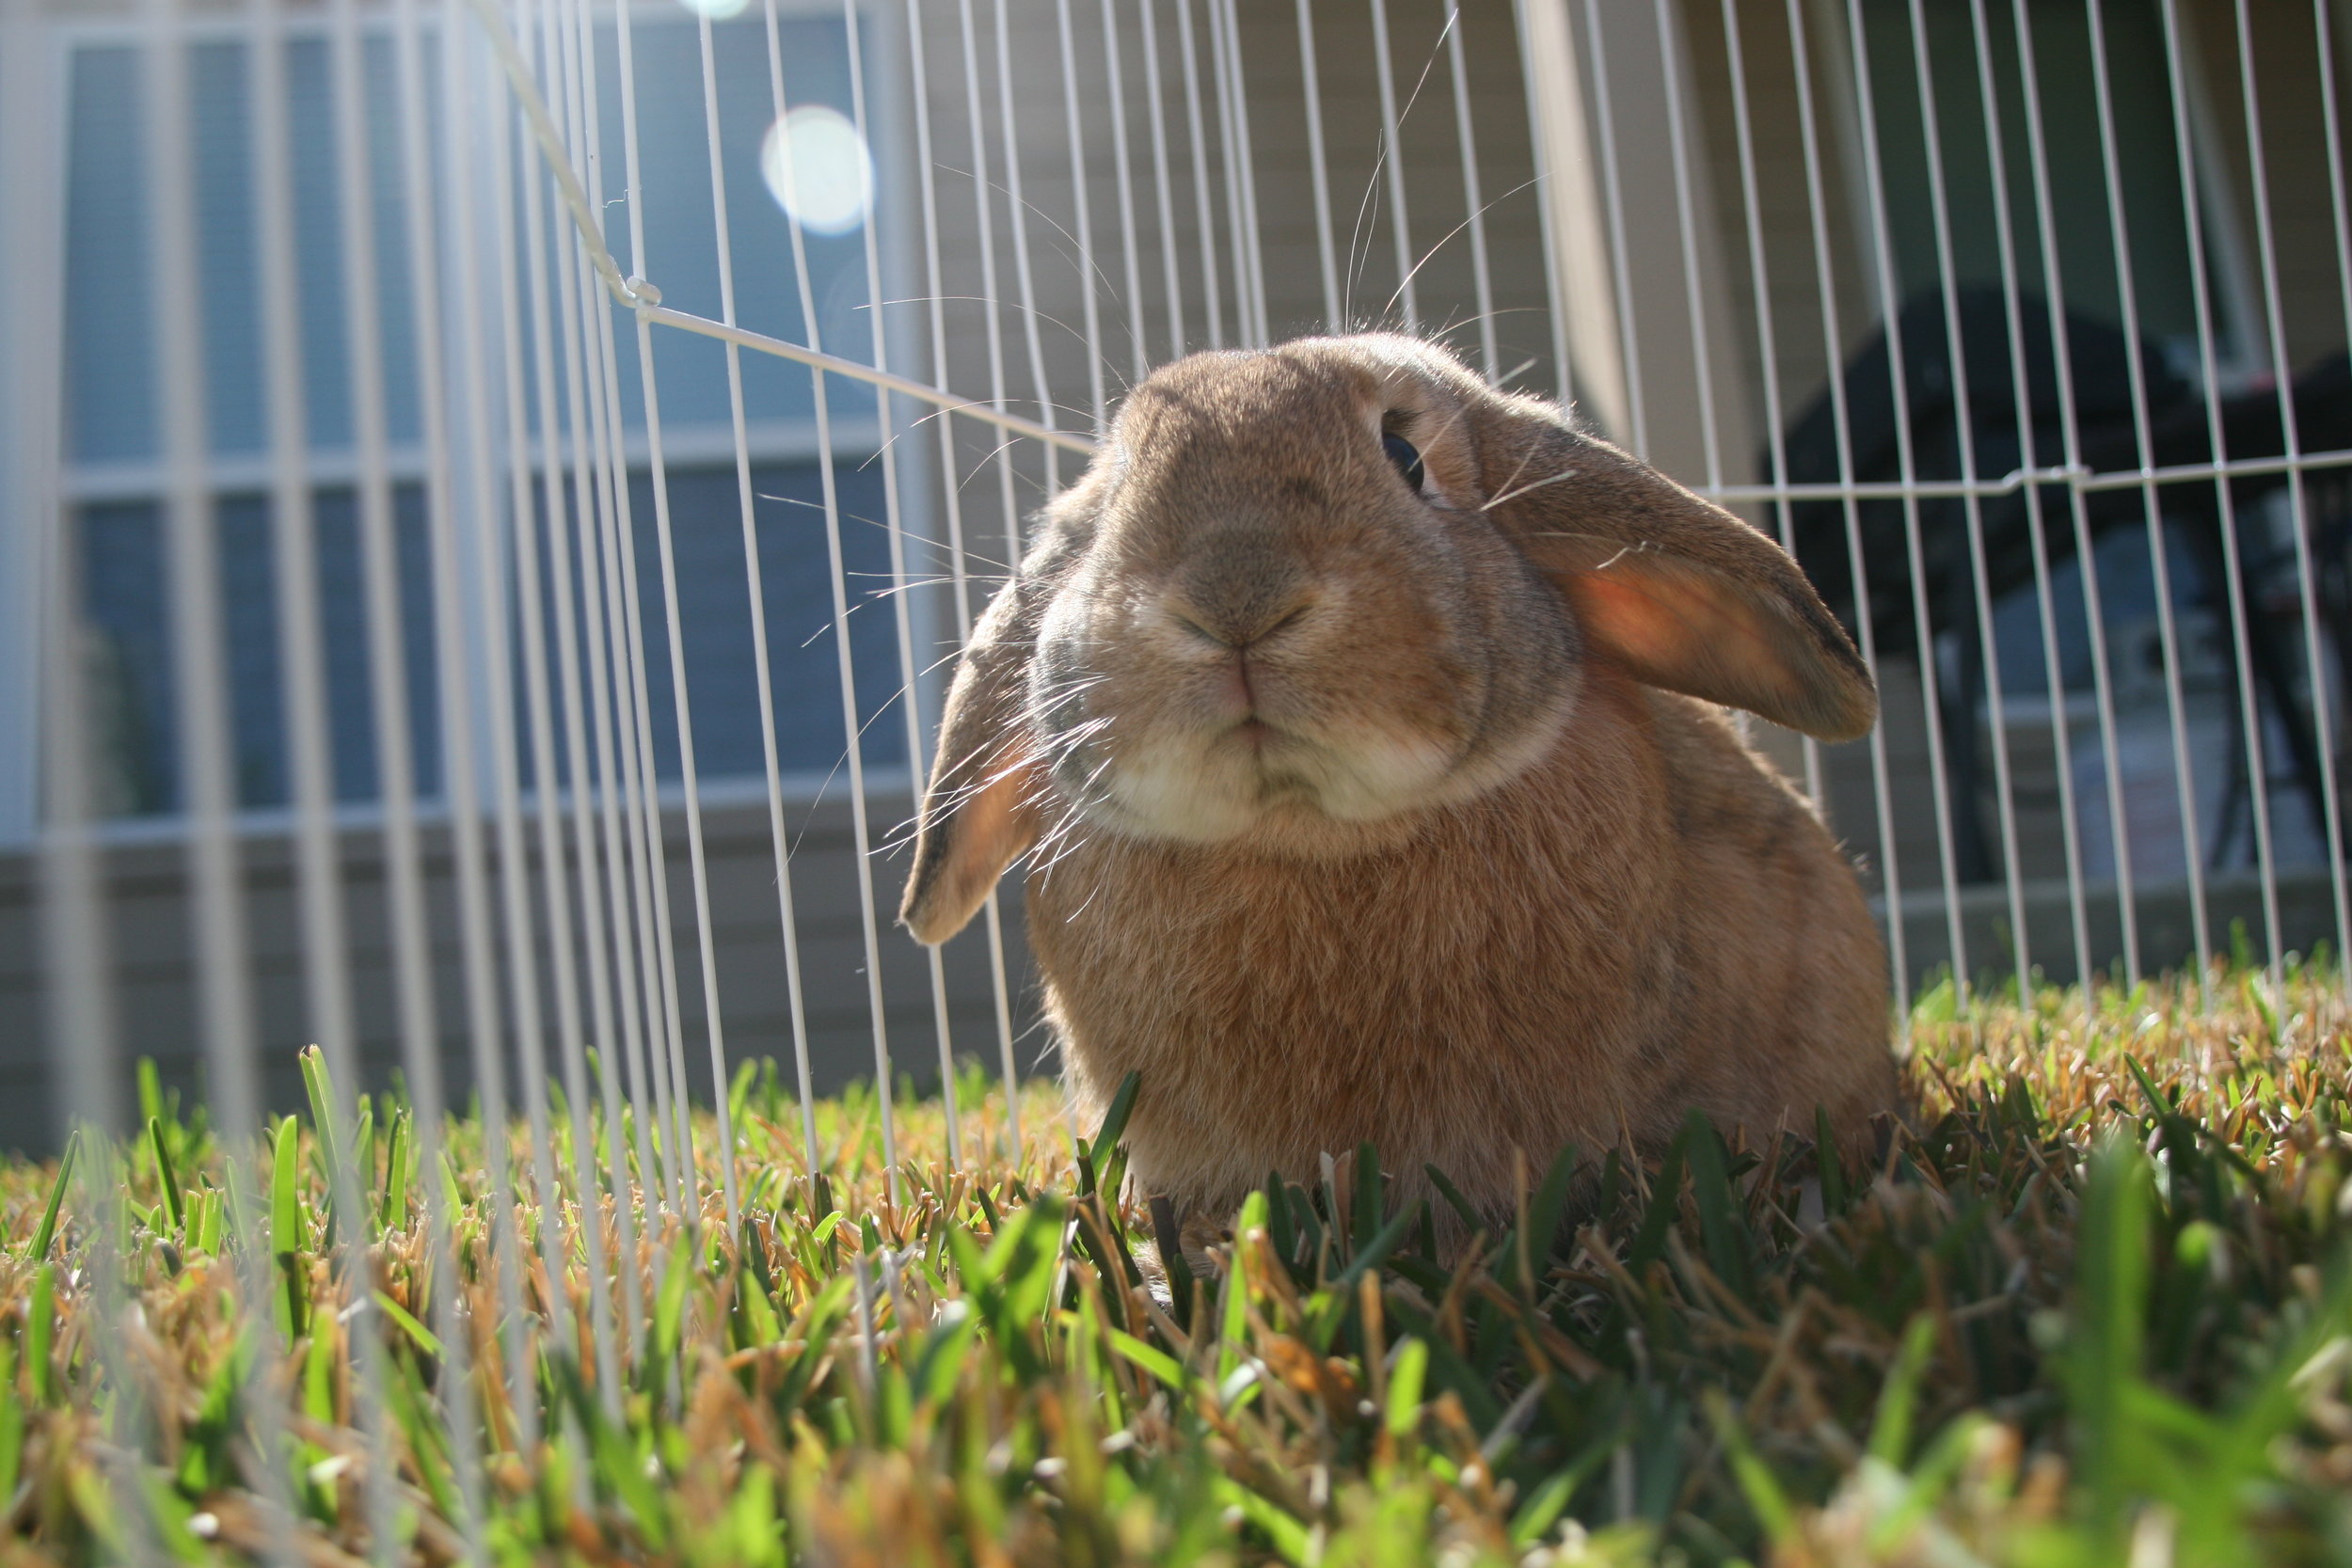 Bunny Soaks Up the Sun Outside on the Grass 1